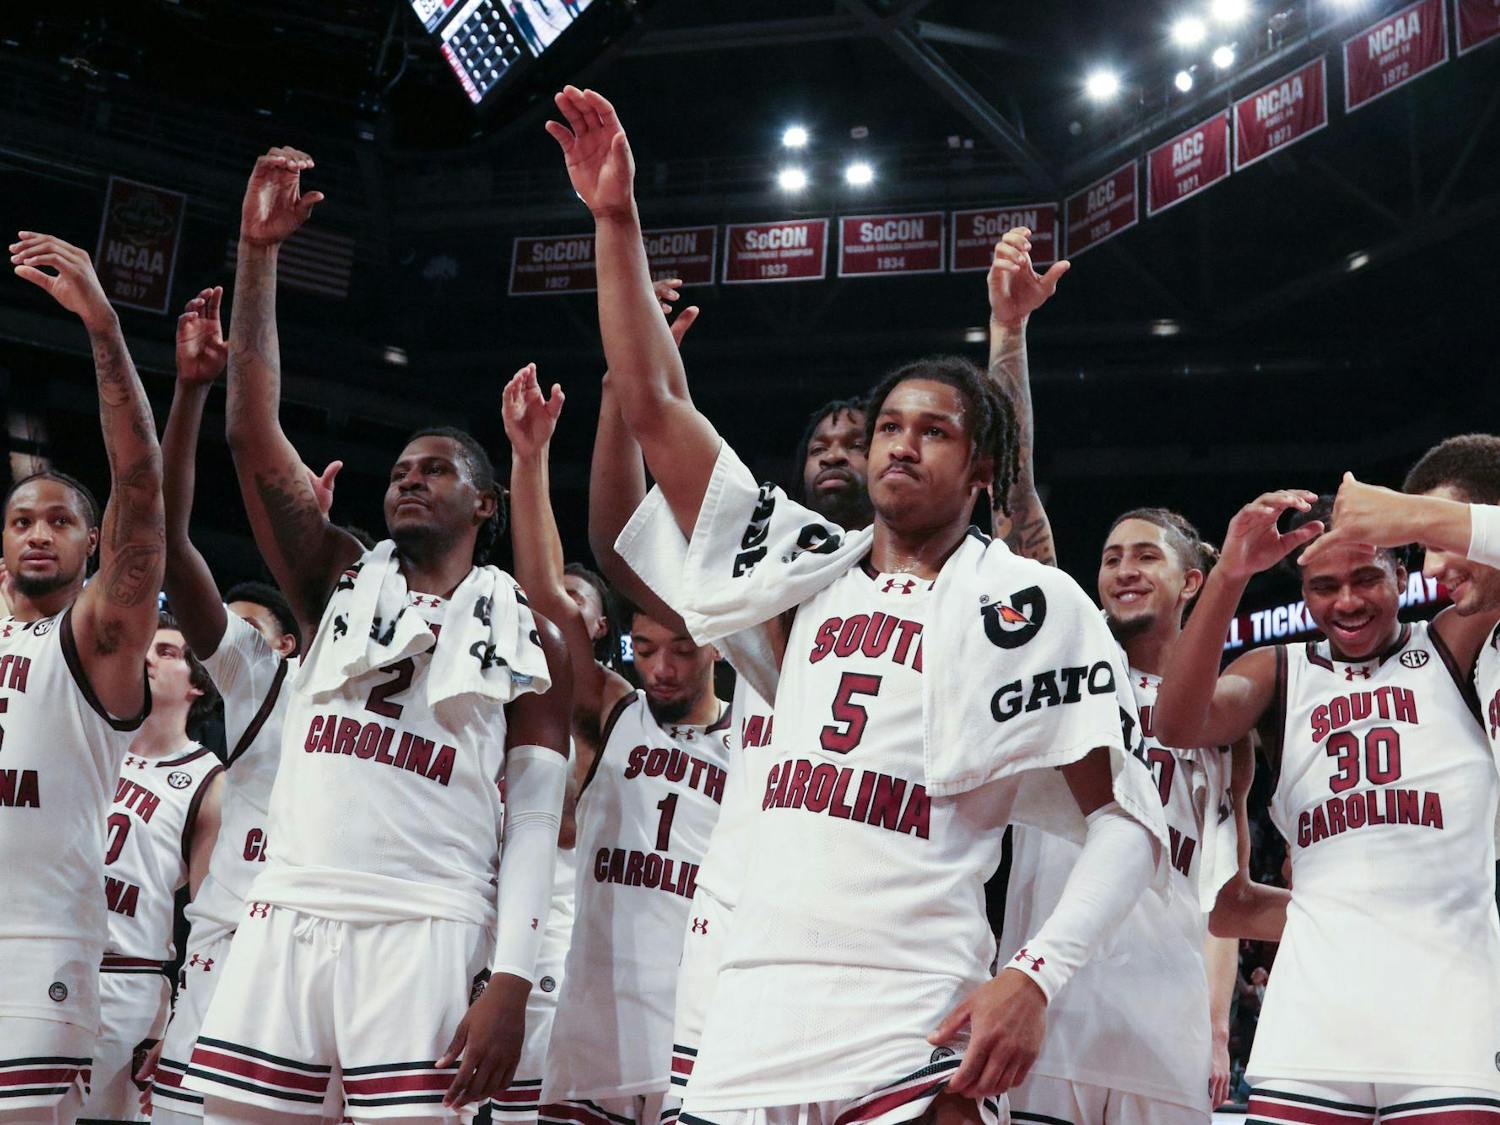 The South Carolina men's basketball team celebrates by singing the university's alma mater after its 89-67 victory over George Washington on Dec. 1, 2023. The Gamecocks are currently 19-3 overall and 7-2 in SEC play.